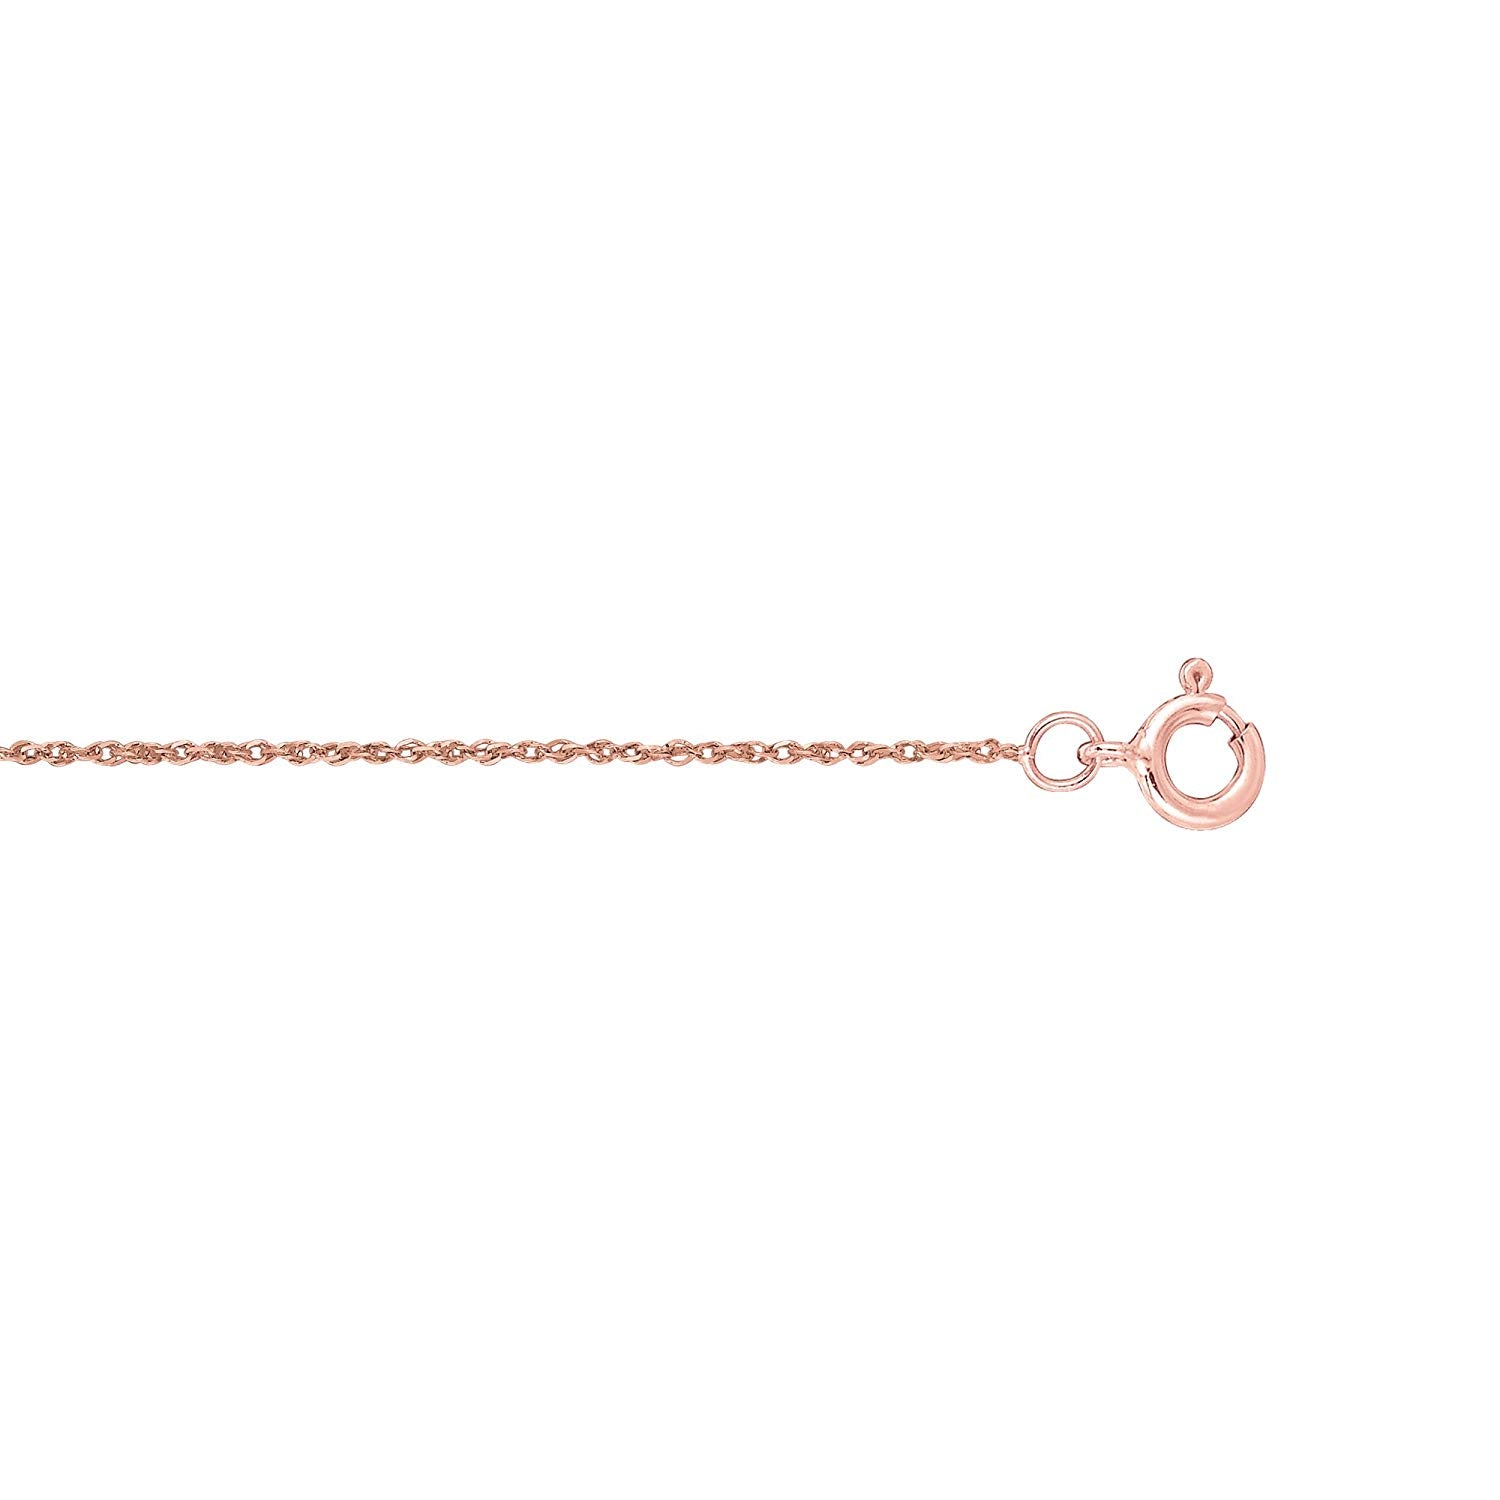 10k Rose Gold Rope Chain Necklace, 0.5mm fine designer jewelry for men and women